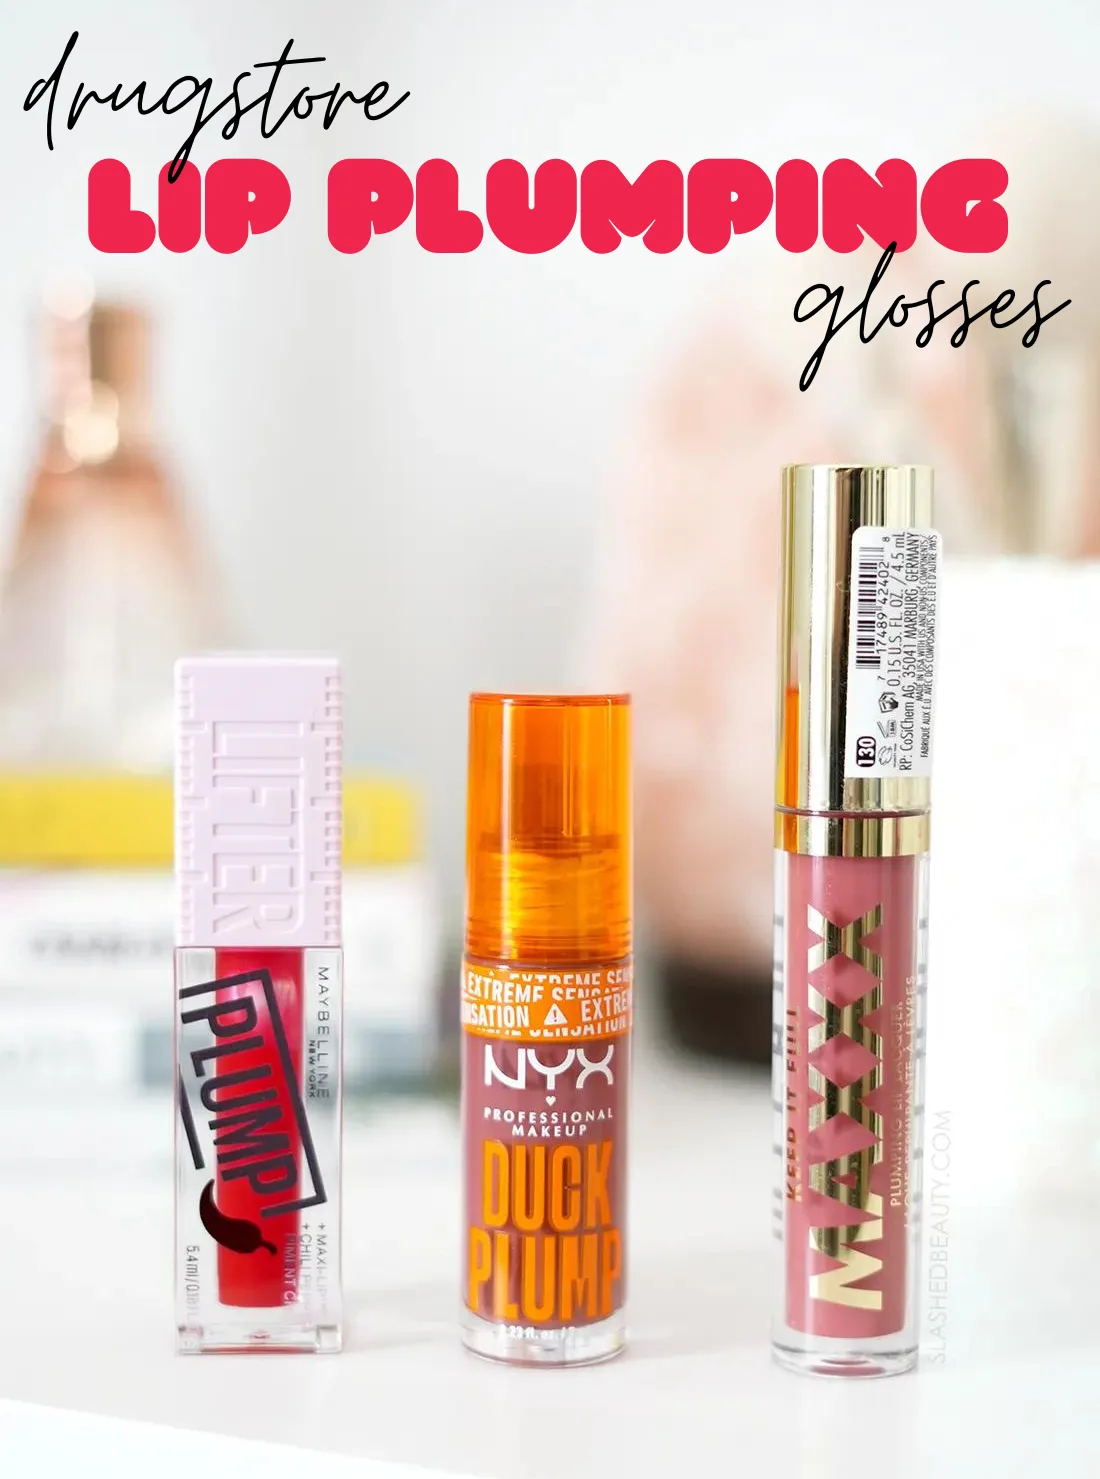 Maybelline Lifter Plump Gloss, NYX Duck Plump Gloss and Milani Keep It Full MAXXX Lip Plumper tubes standing side by side with text: Drugstore Lip Plumping Glosses | Slashed Beauty